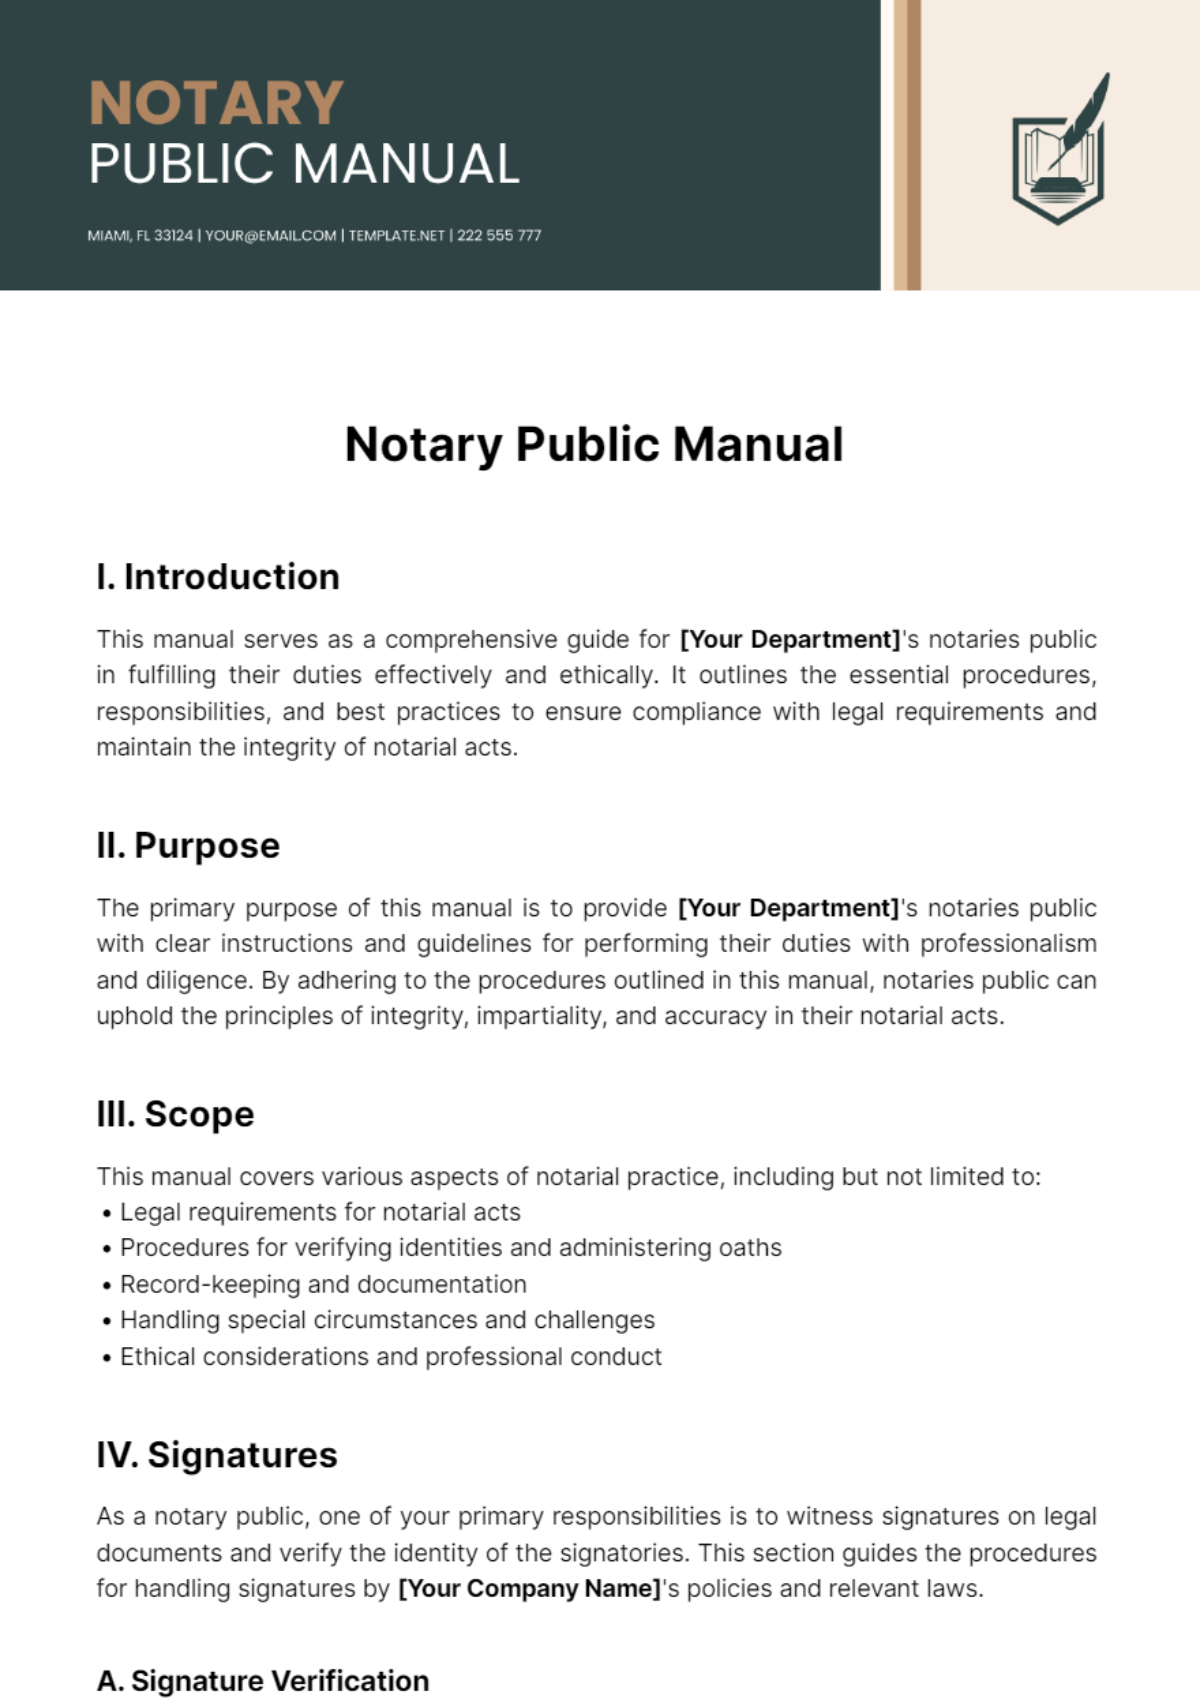 Free Notary Public Manual Template